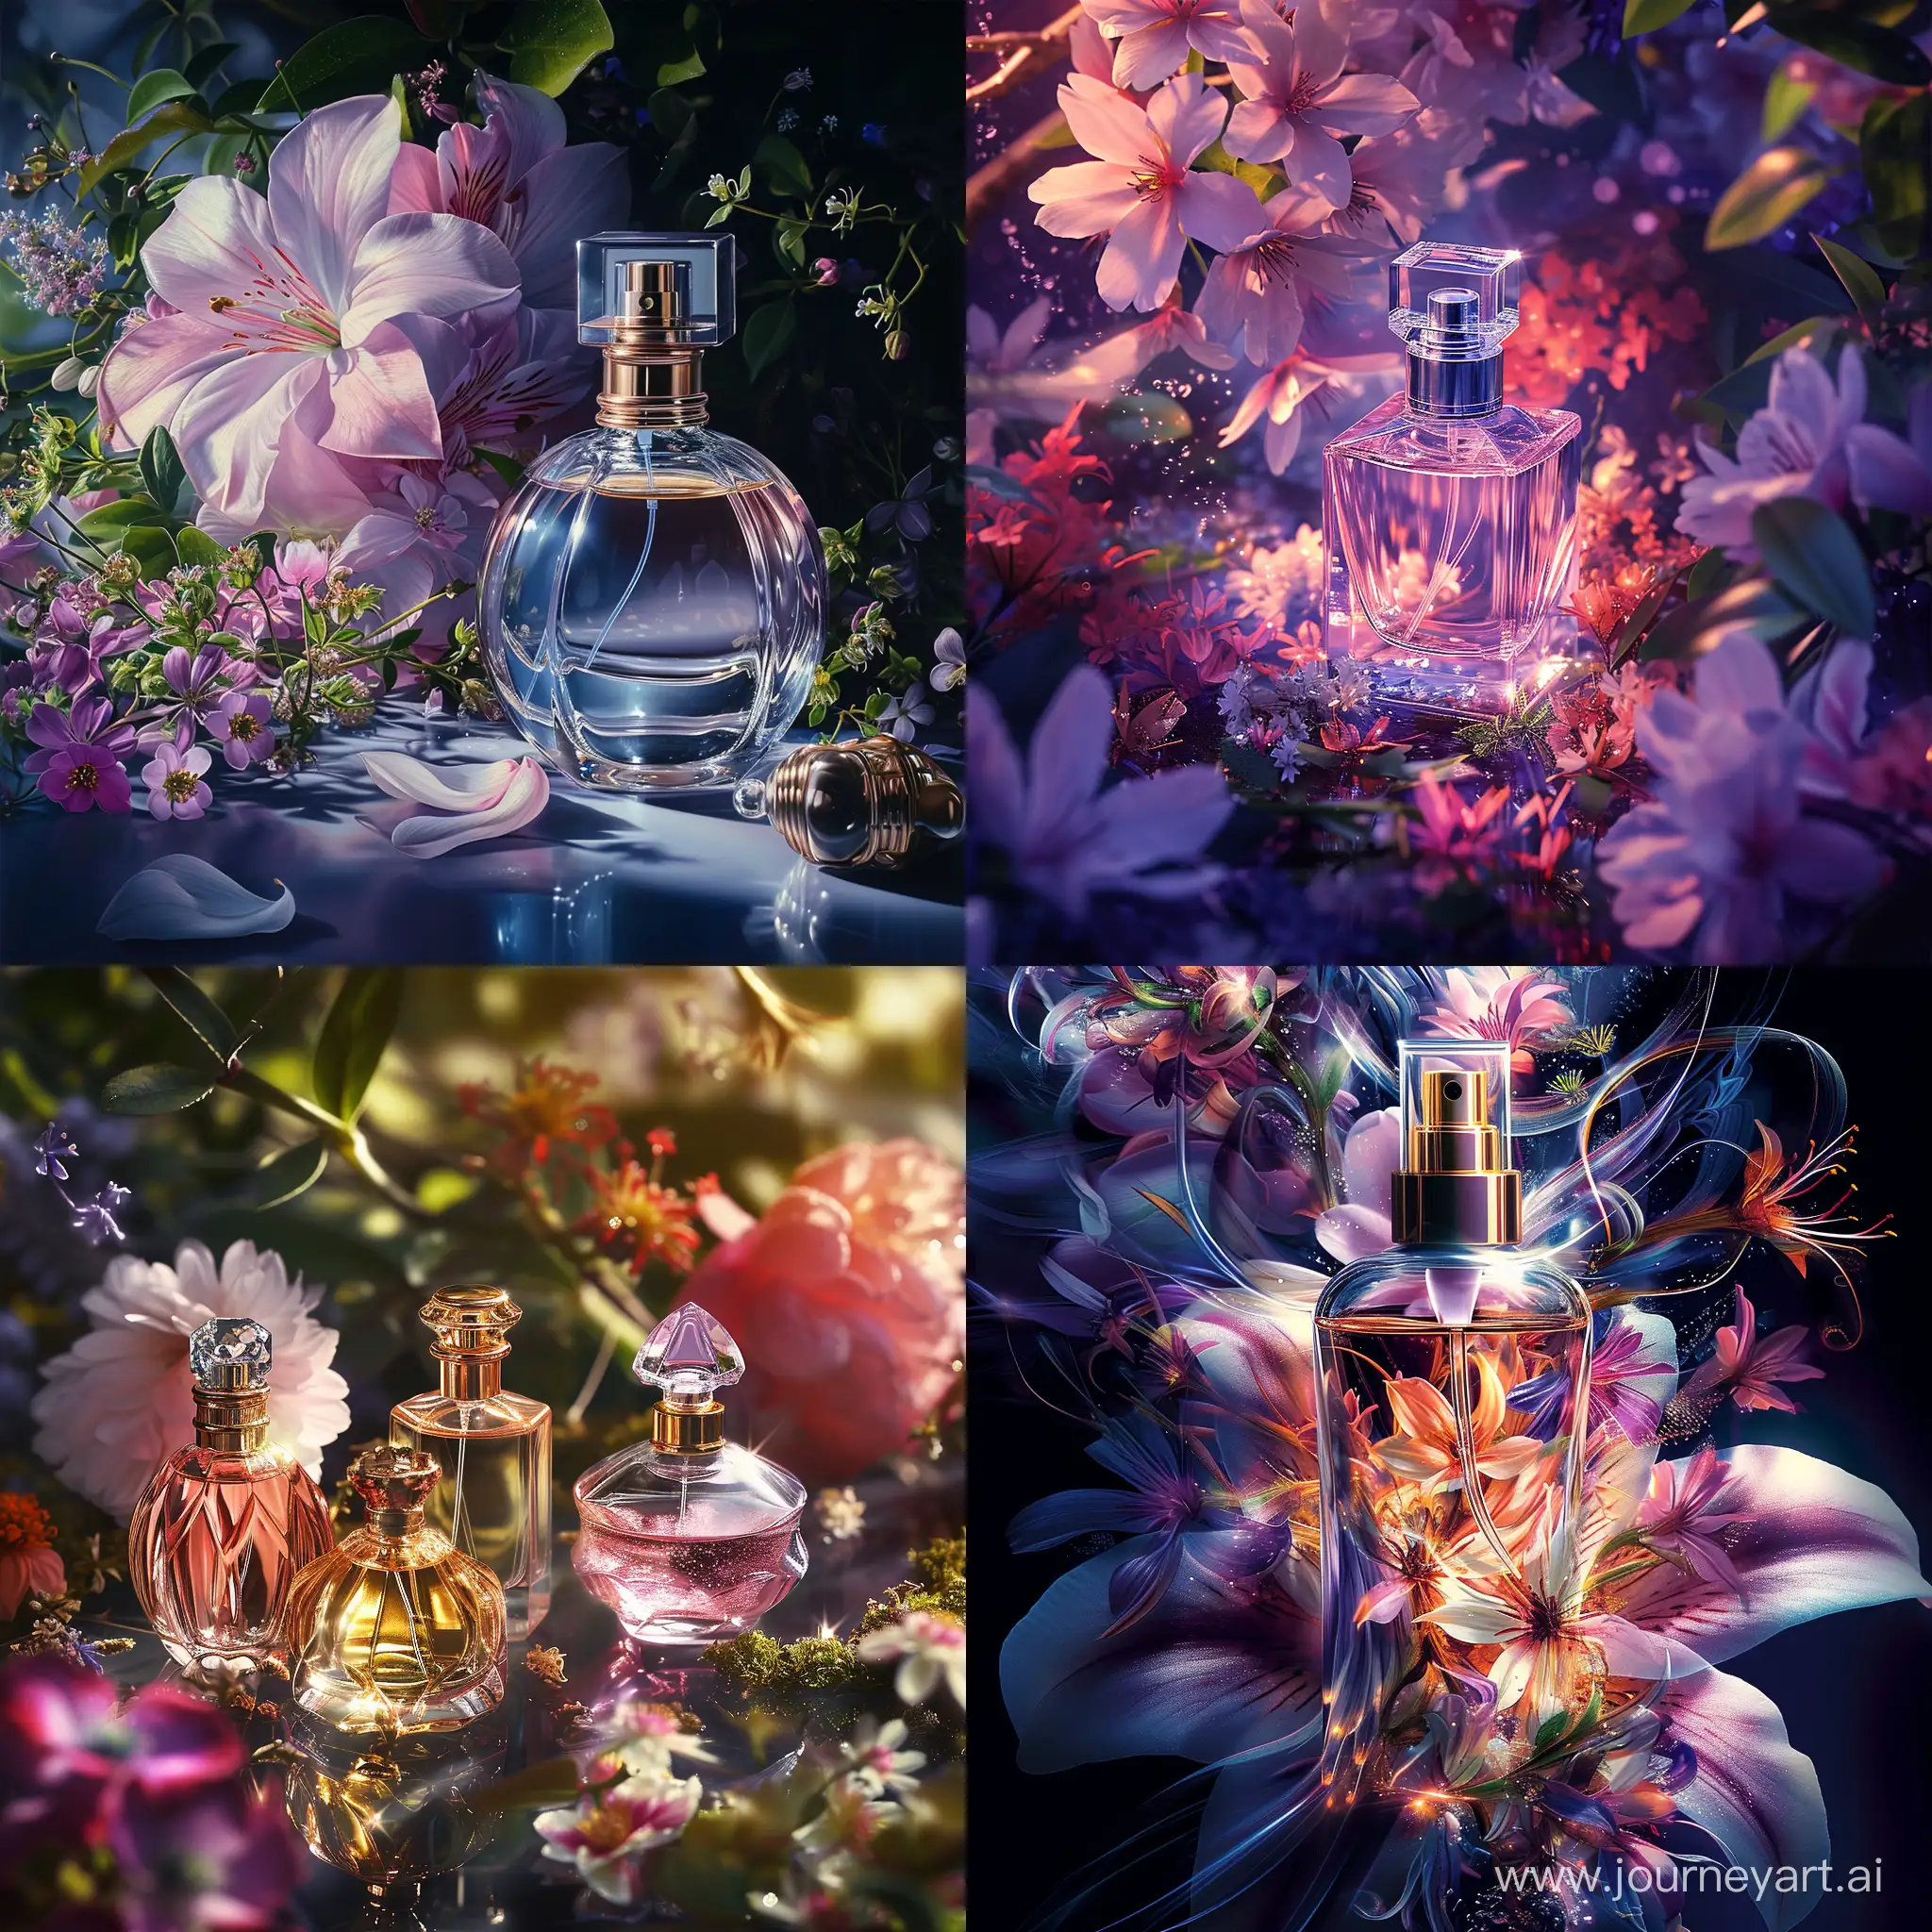 fine lines and shadows, the perfumes sparkle with a touch of magic and mystery, reflecting the beauty of the floral symphony that surrounds them, with the clarity and detail of 8K Ultra HD images, every petal, every shade of otherworldly charm comes to life in vivid brilliance, by yukisakura, amazing full color